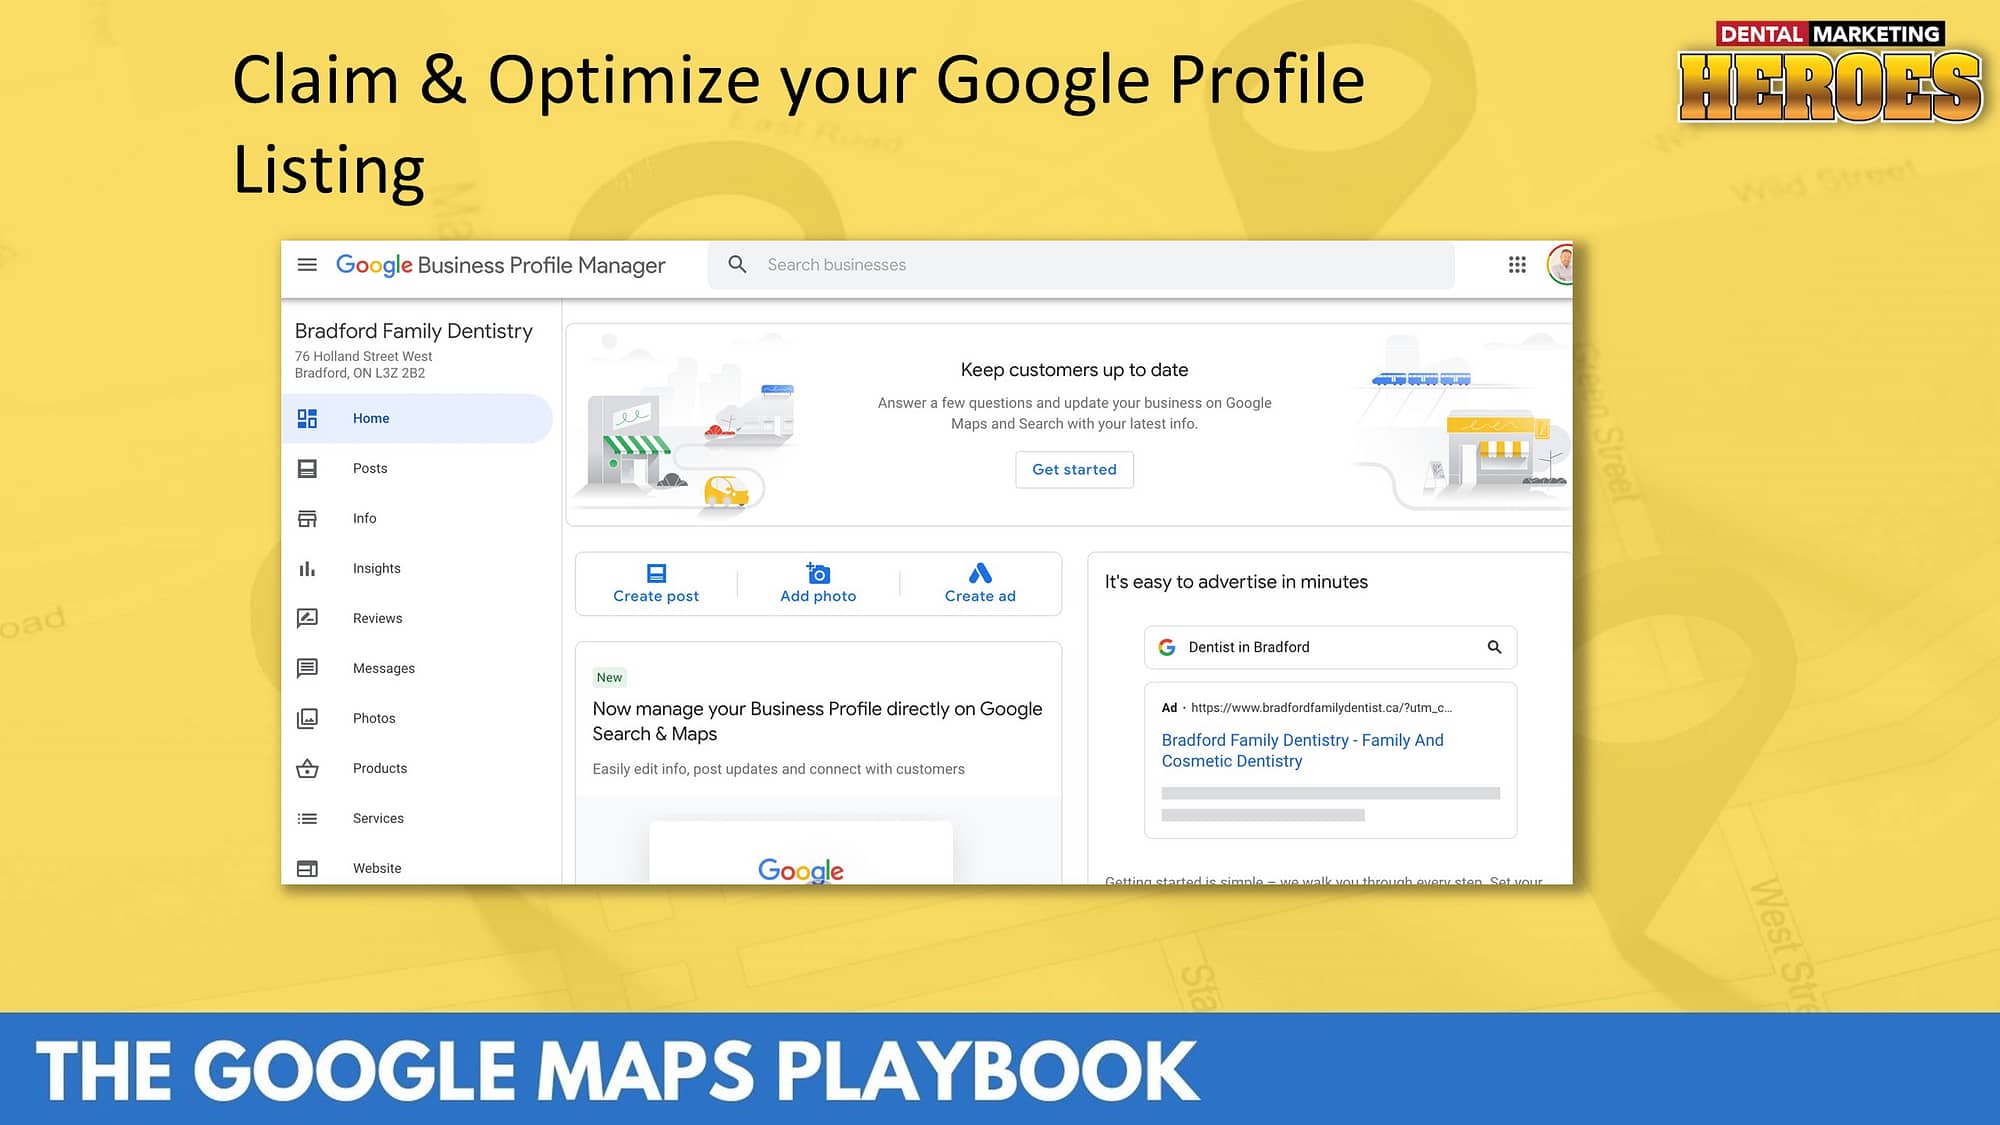 Claim and optimize your Google Profile listing